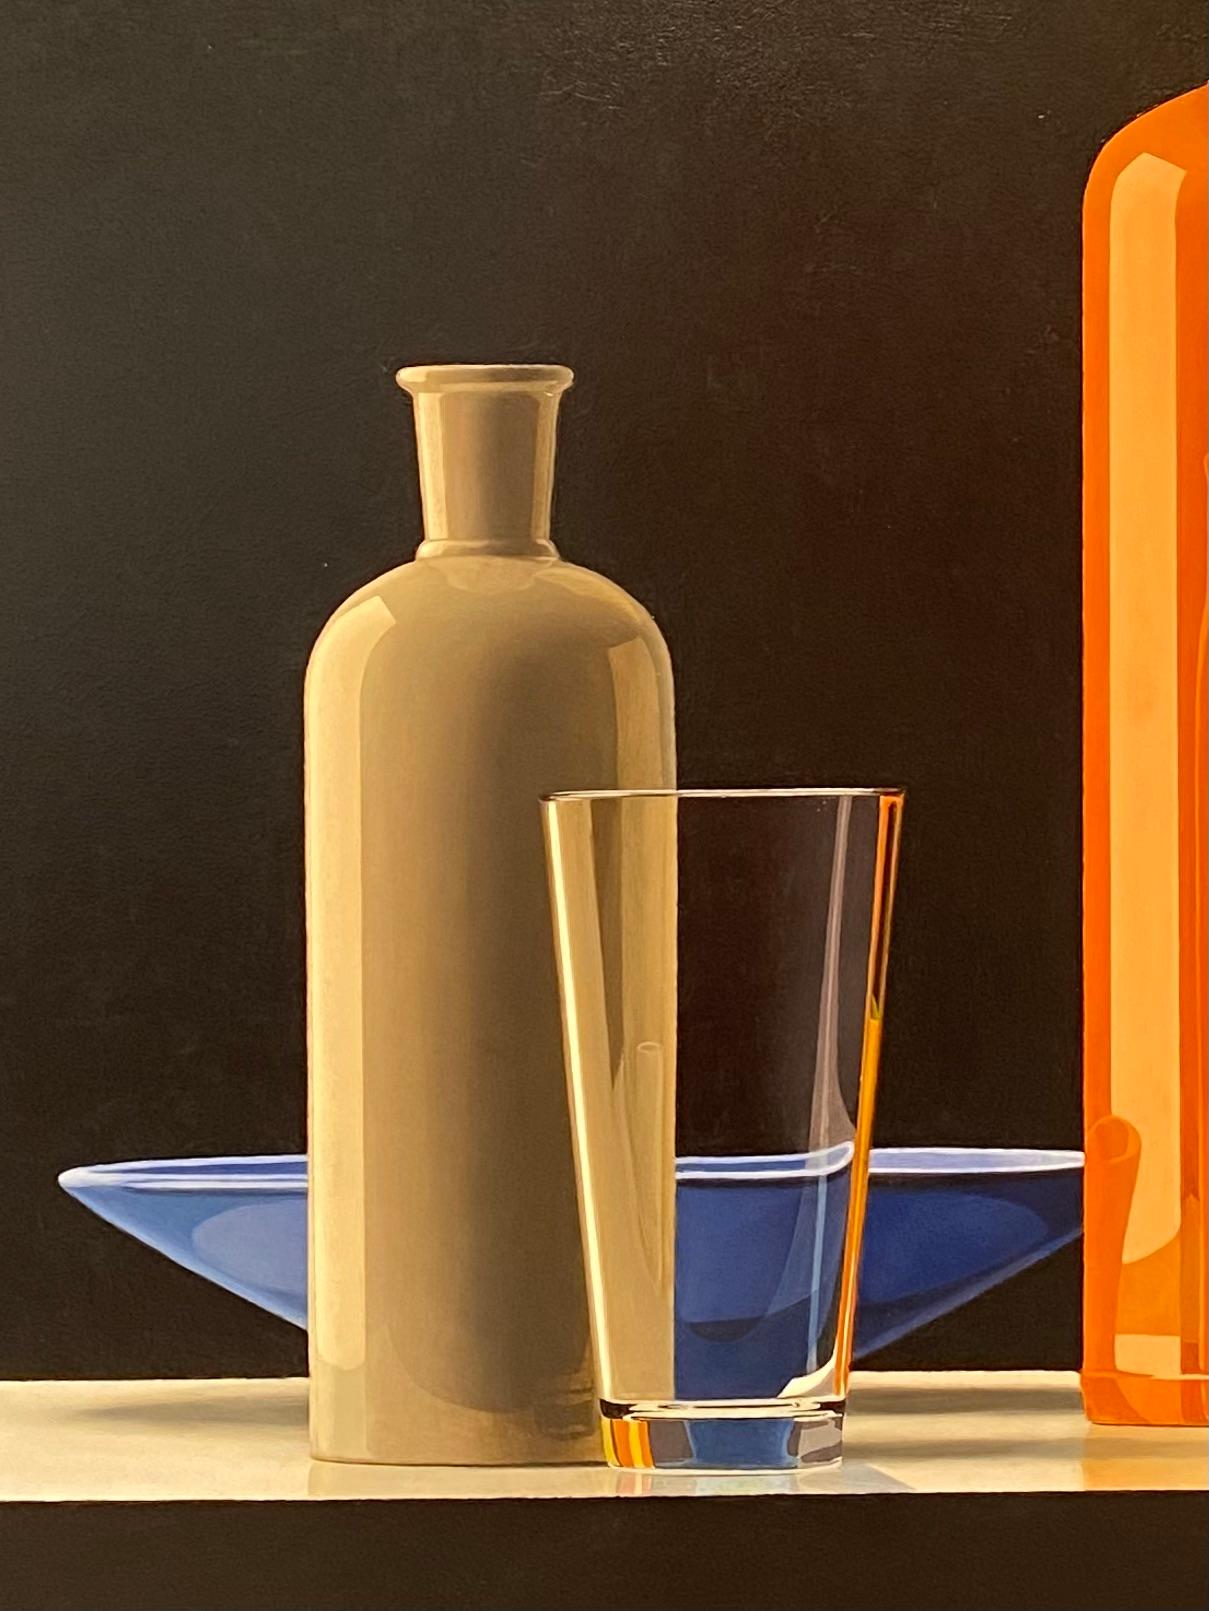 Henk Boon 
Composition pitchers, dish, bowl and beer glass
Oil on wood
80 x 96 cm
Frame included 87 x 103 cm  

The still-life paintings of Dutch painter Henk Boon show an abstaction of reality. 

Painted and composed so precisely and carefully that